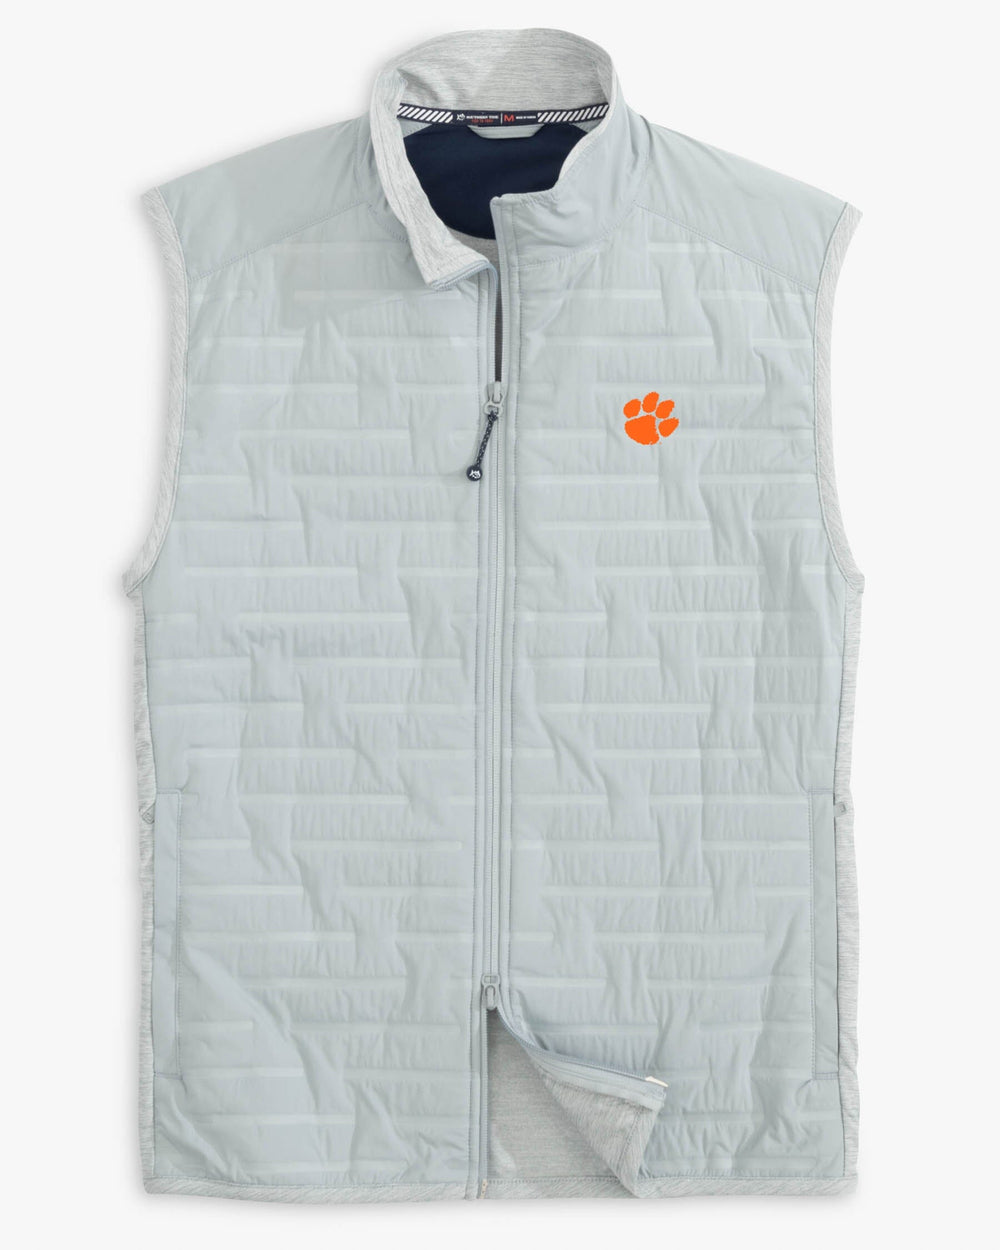 The front view of the Southern Tide Clemson Tigers Tide Abercorn Vest by Southern Tide - Gravel Grey